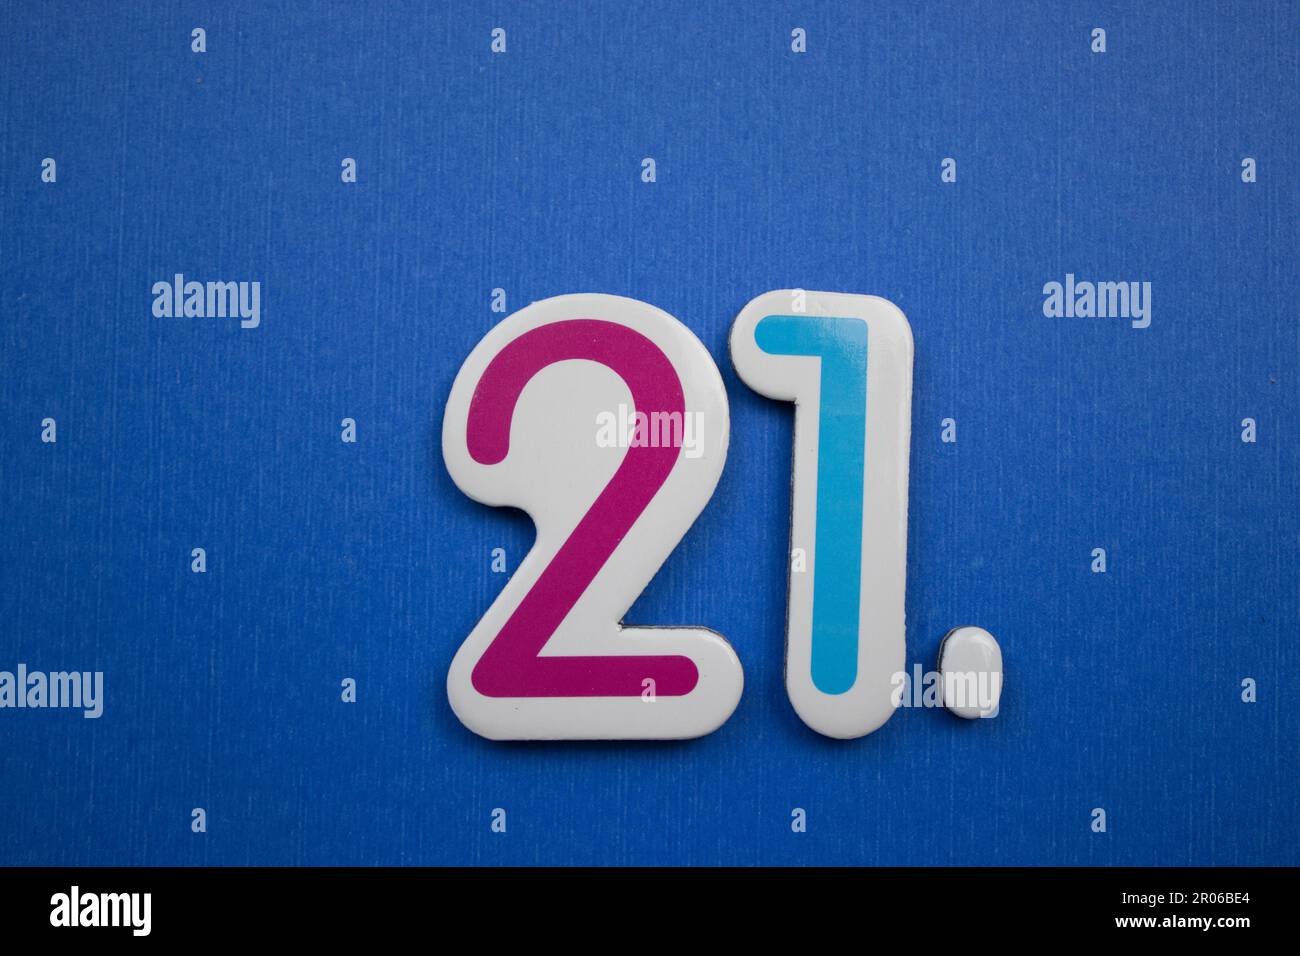 The number 21, placed on a blue background, photographed from above, colored red and light blue. Stock Photo